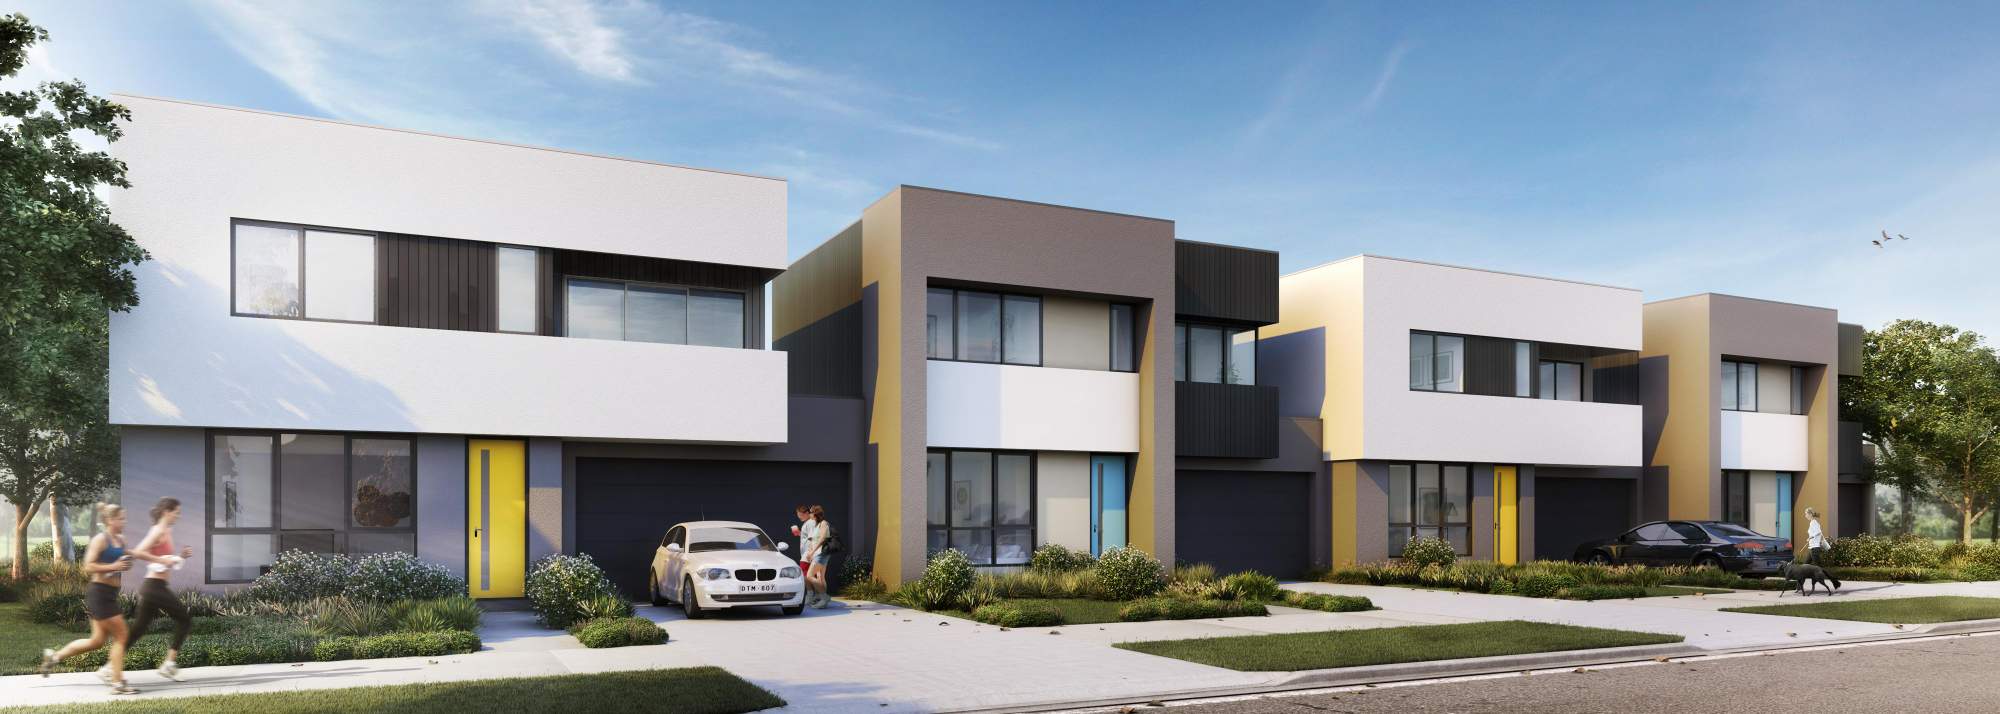 Townhomes a popular choice in Melbourne